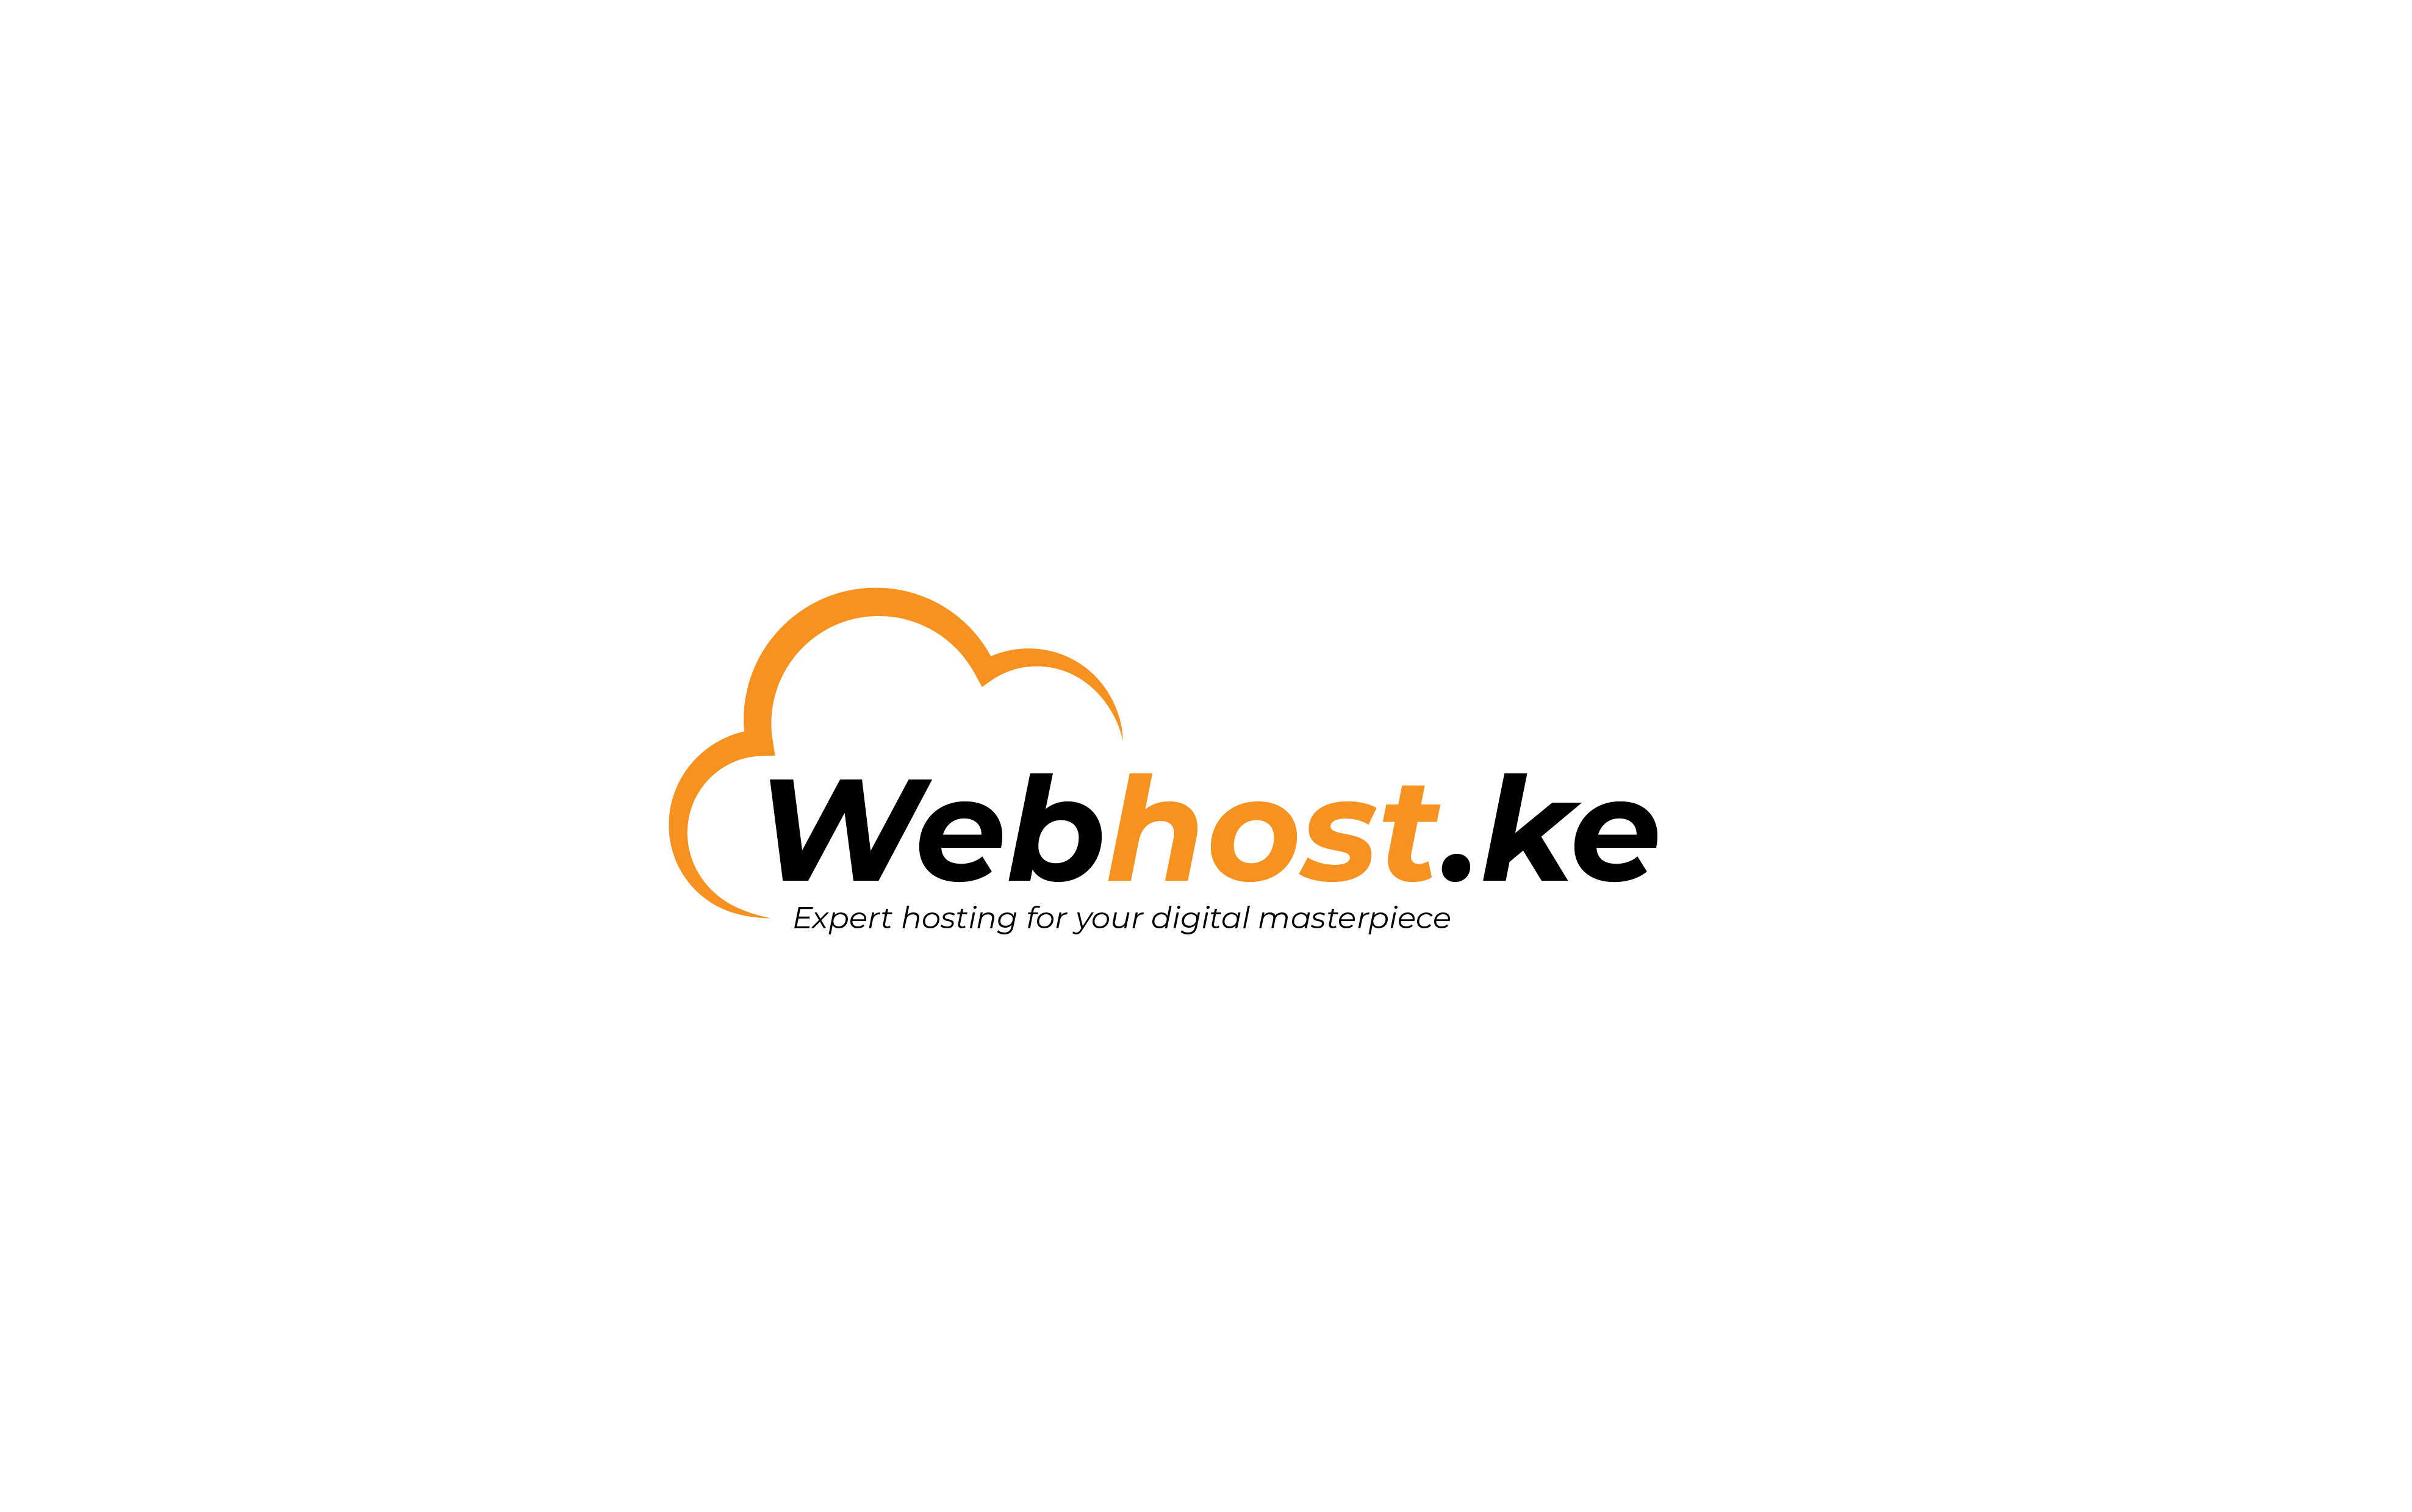 Webhostke Logo Design in Nairobi Kenya. The Best Logo Design Company in Nairobi, Kenya, Kampala, Uganda, Dar es Salaam, Kigali, Rwanda, Juba, South Sudan, and Mogadishu, Somalia is Galactik IT. Galactik IT provides corporate, governmental, non-profit, and small- and medium-sized business clients with expert logo graphics design services. With an expert working on your brand visuals at each stage, Galactik IT offers a logo design thorough process in Nairobi, Kenya that smoothly takes you from planning to post-launch. Galactik IT never skimped on quality. Galactik IT builds beautifully made, effective logo by by hand. Logo, company profile, business card, letterhead, brochure, social media posters, flyers designers in nairobi kenya